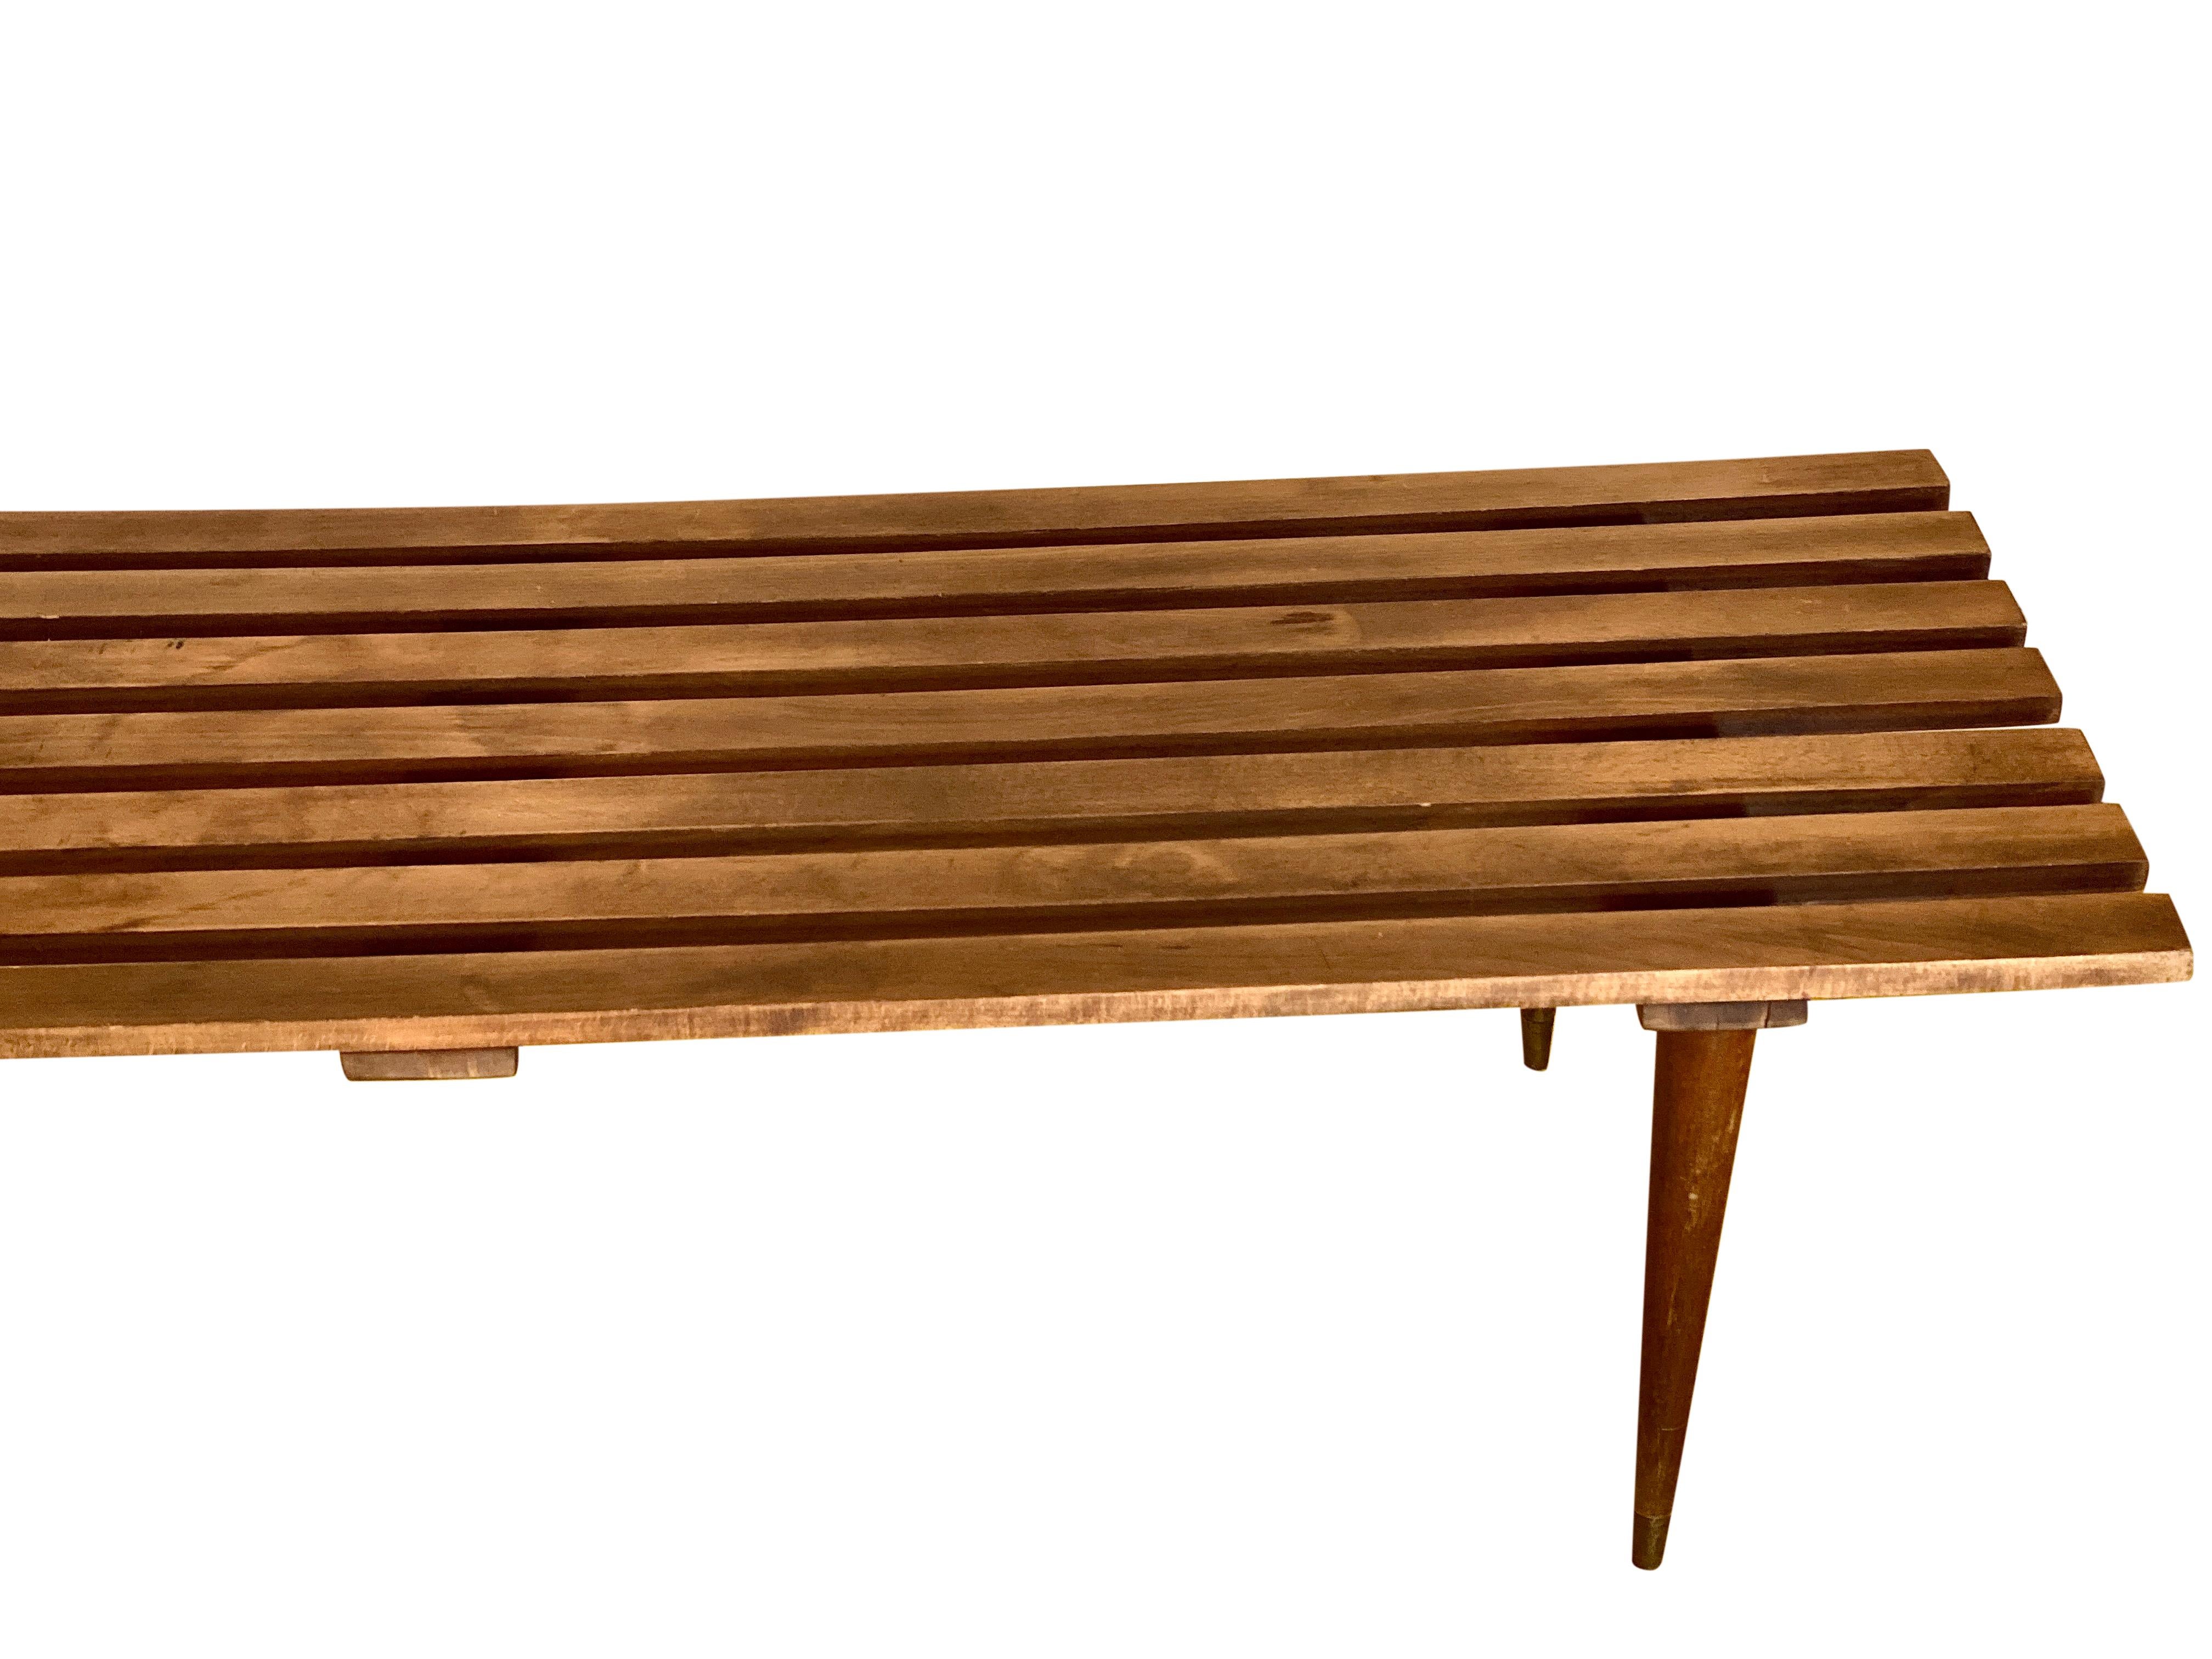 Beautiful, long, slat Mid-Century Modern bench/coffee table in the manner of George Nelson. In great vintage condition with light, age-appropriate wear throughout. Incredibly solid and sturdy. A wonderful piece that belongs in any stylish home.

 